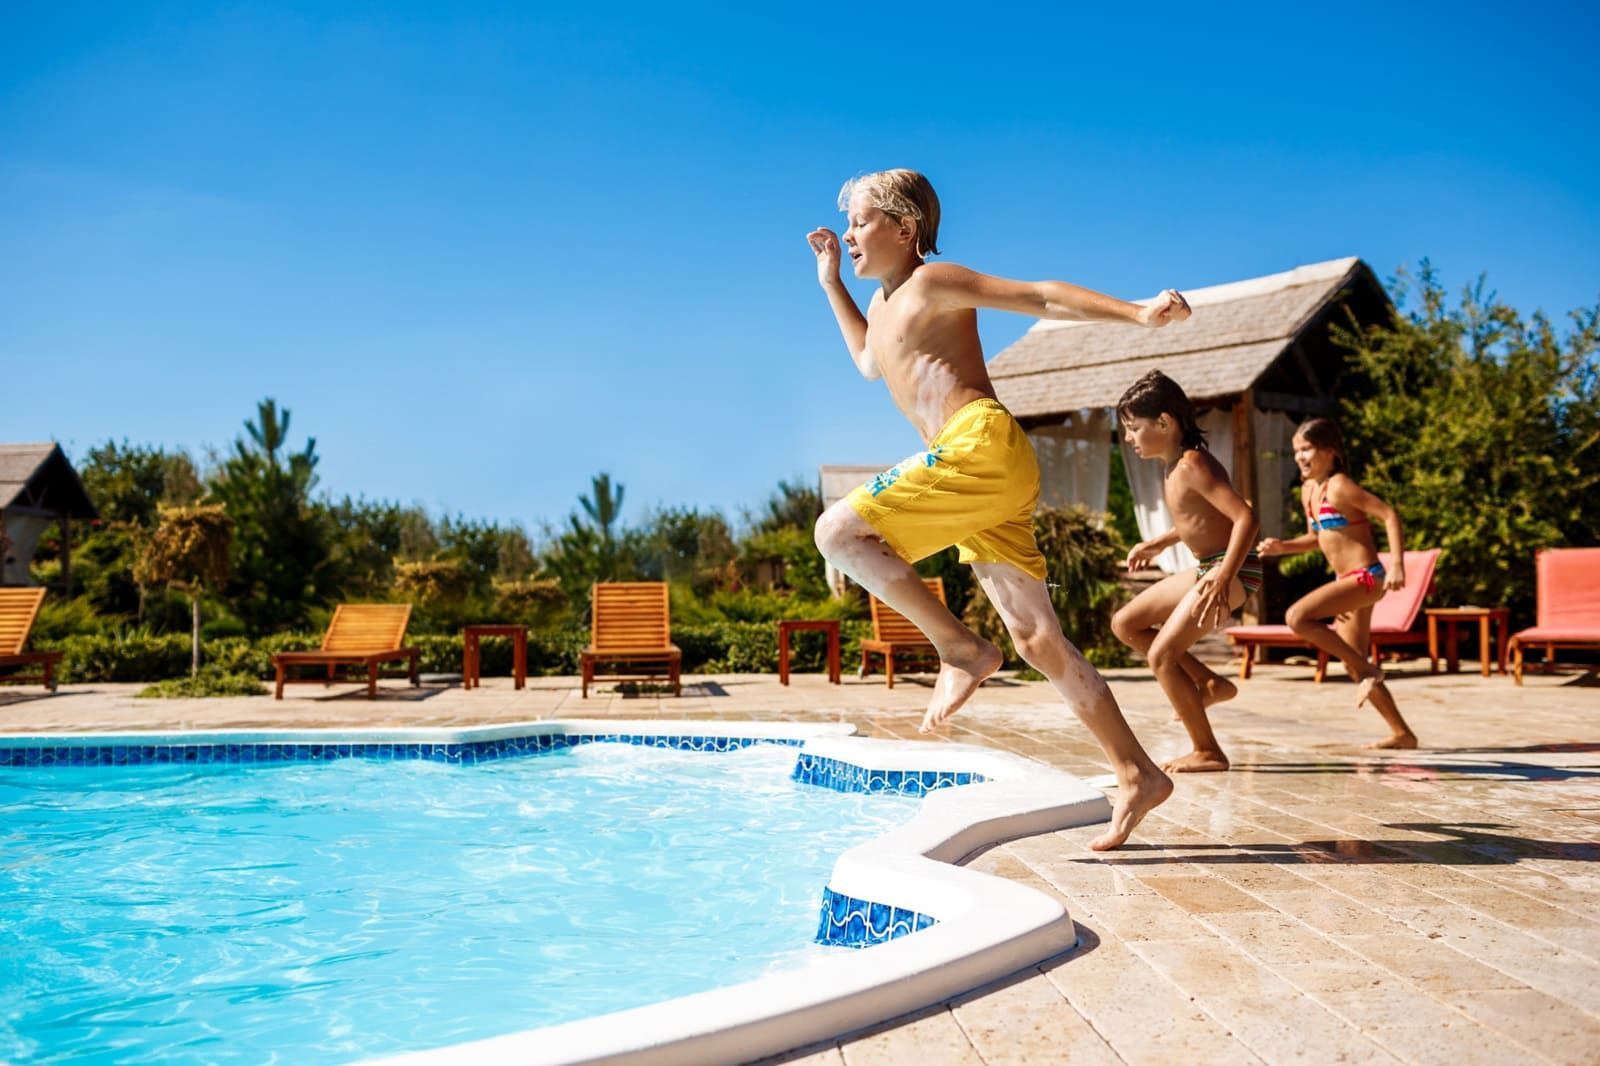 Pool and Hot Tub Safety